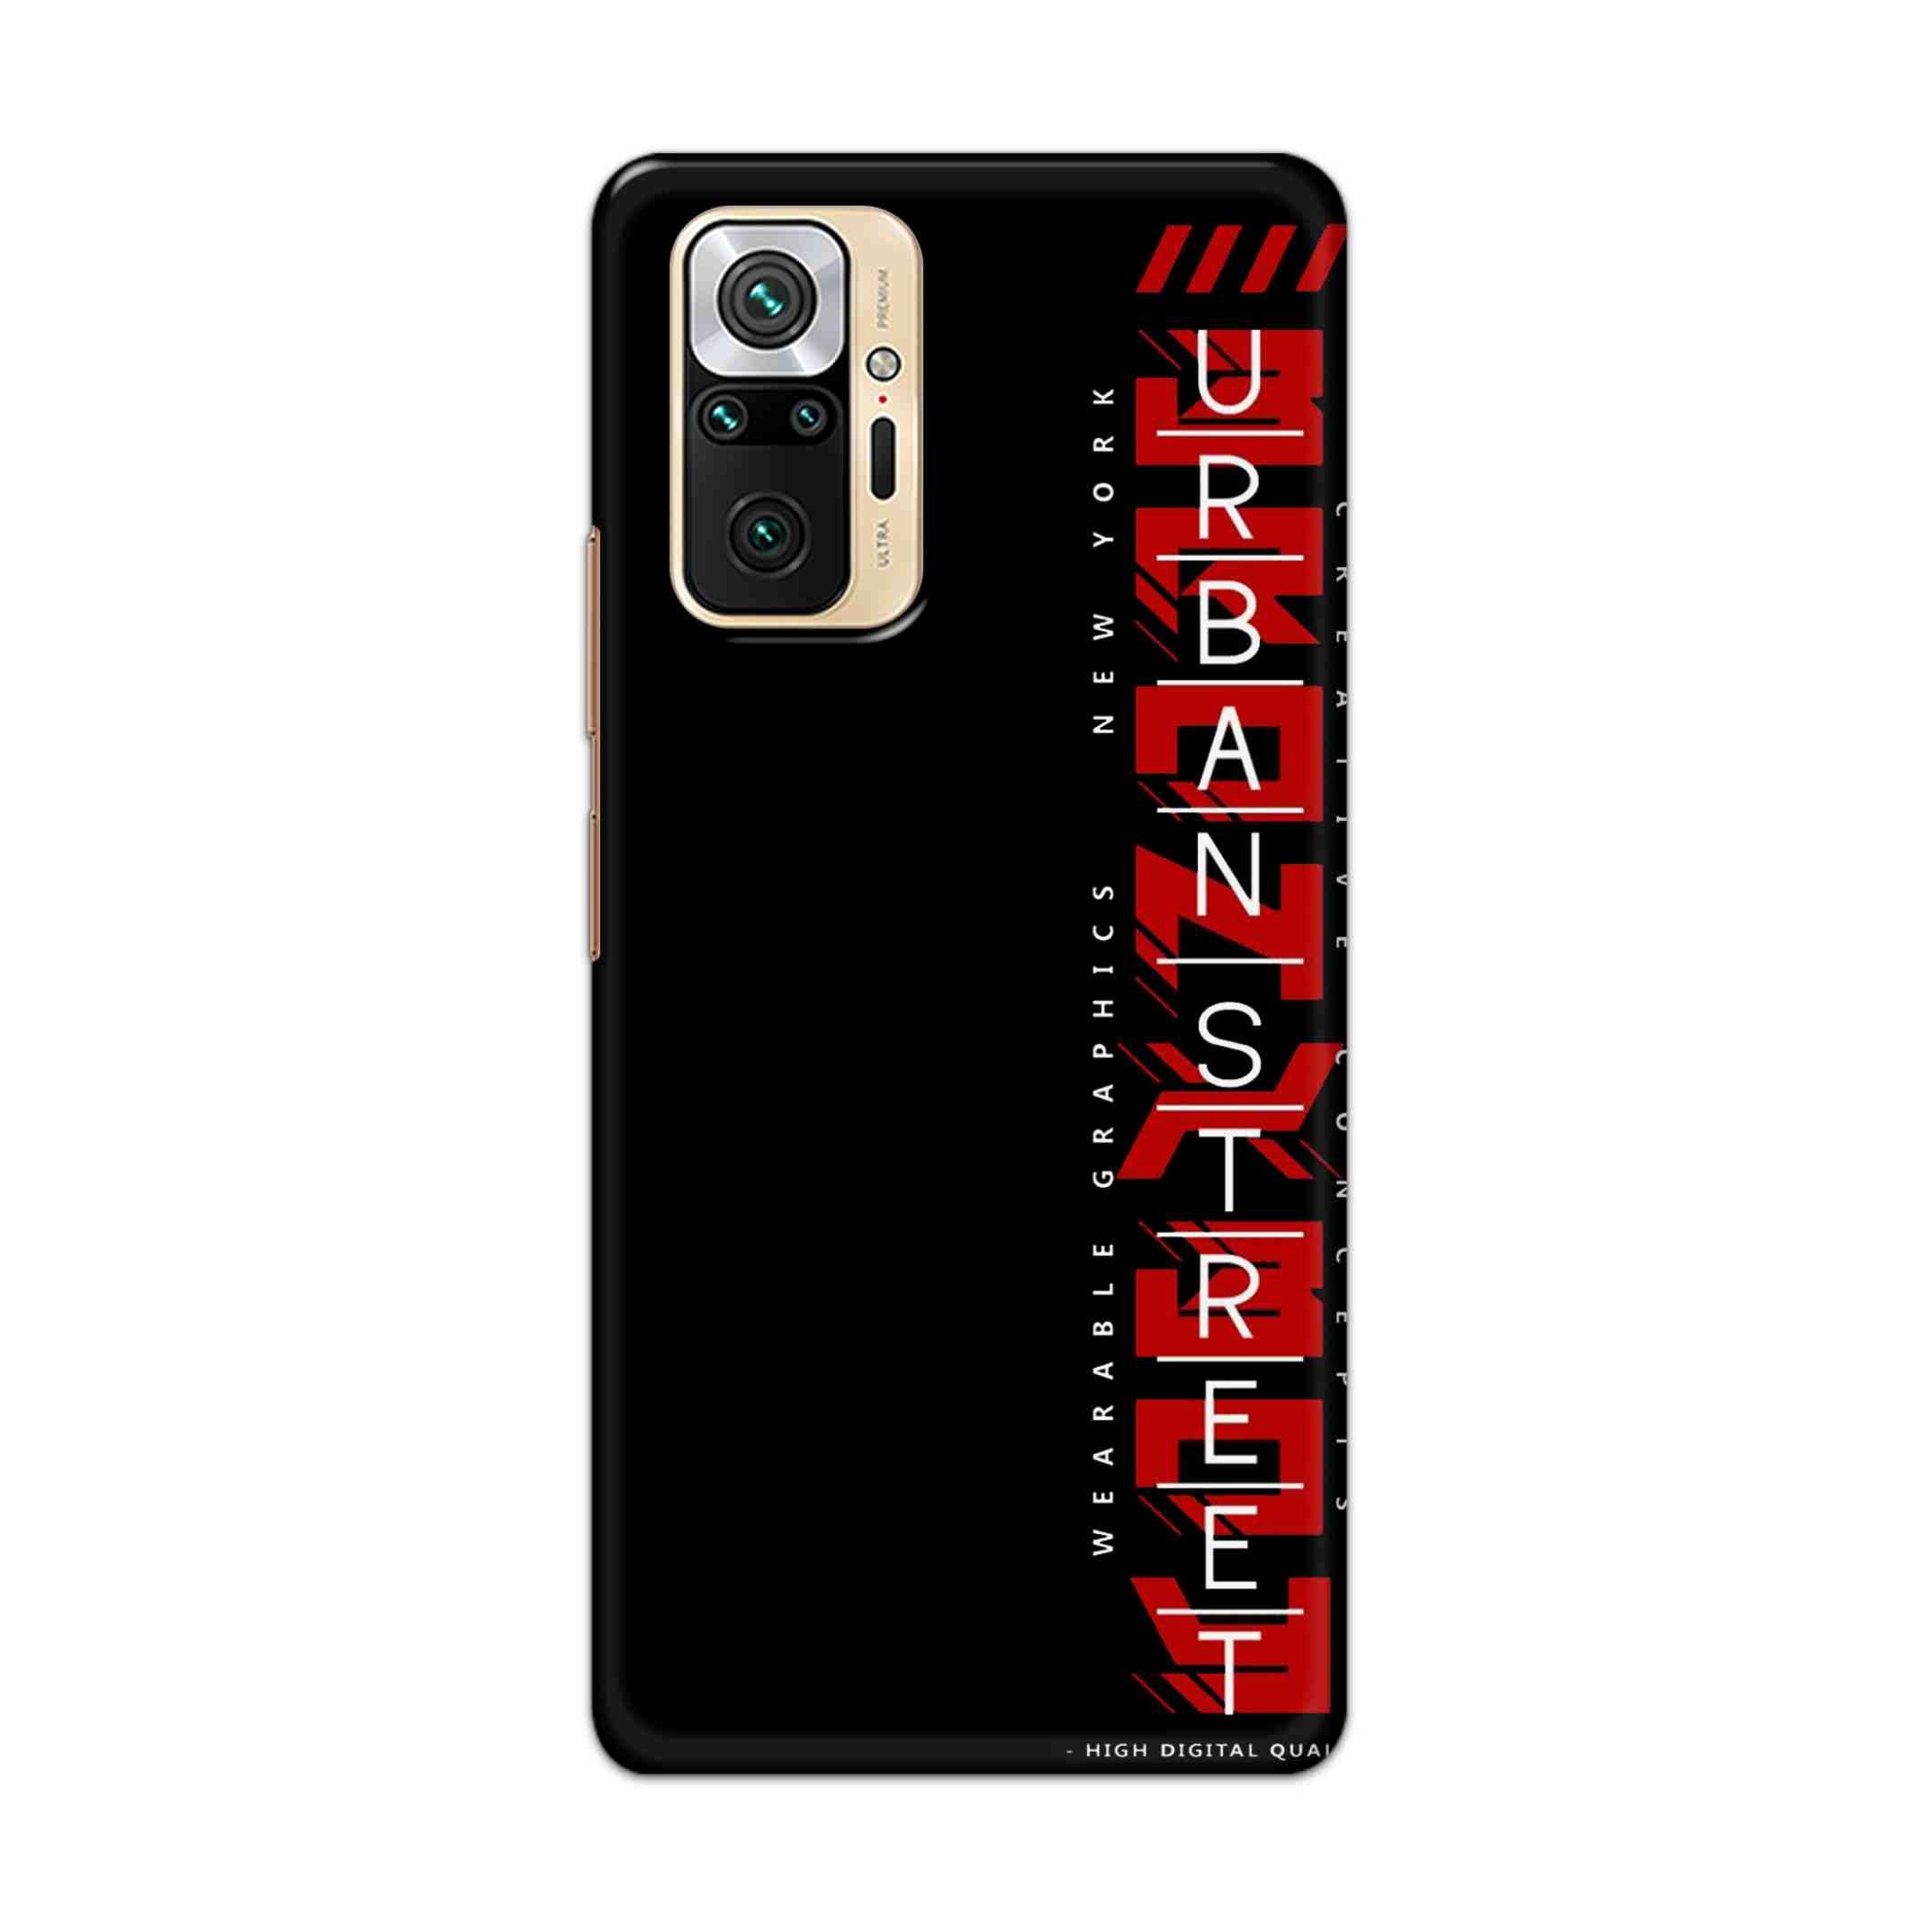 Buy Urban Street Hard Back Mobile Phone Case Cover For Redmi Note 10 Pro Online